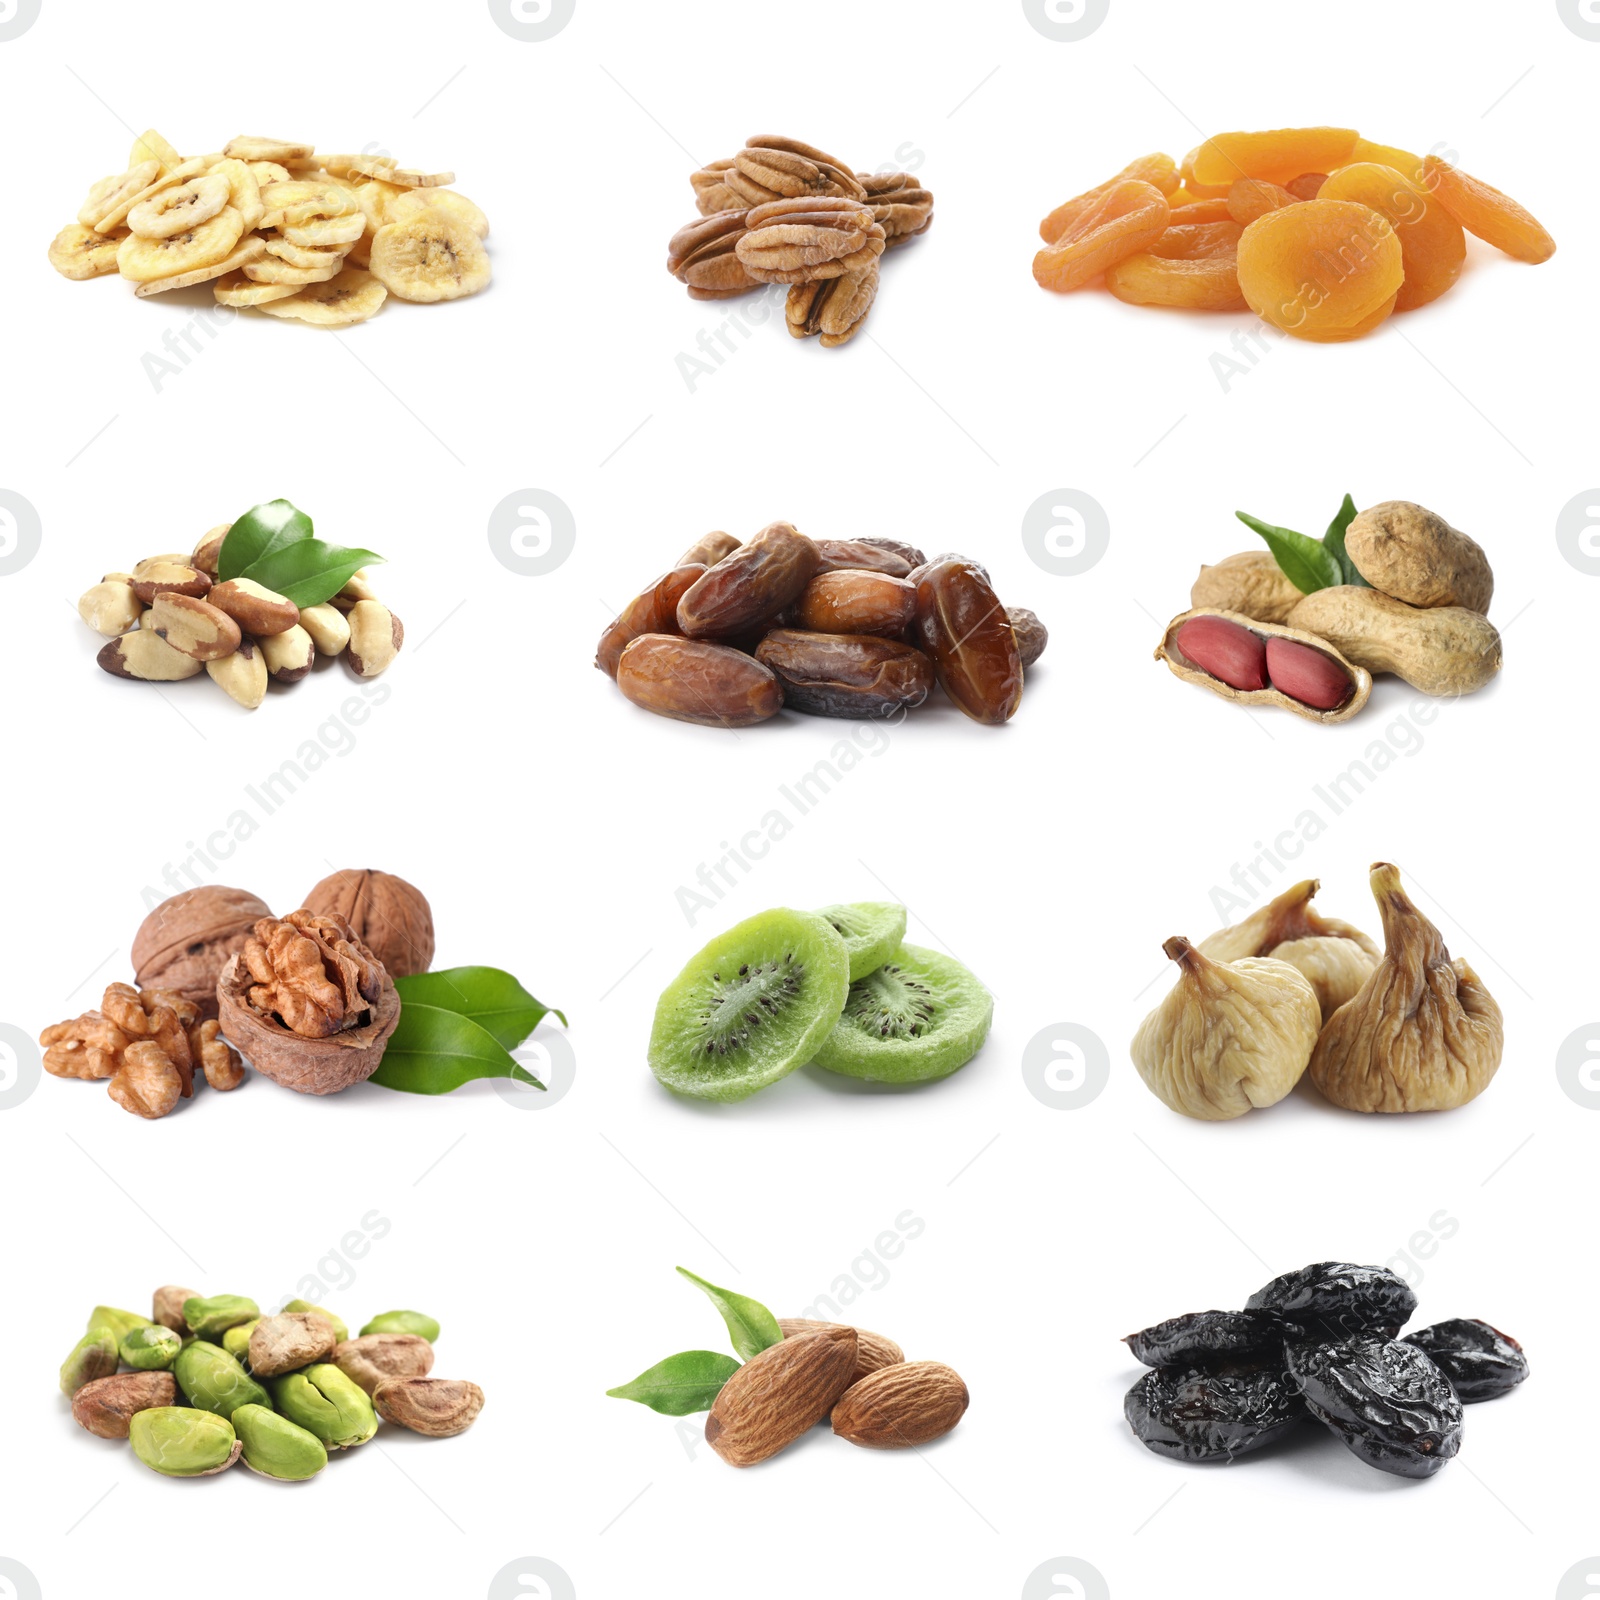 Image of Set of different dry fruits and nuts on white background